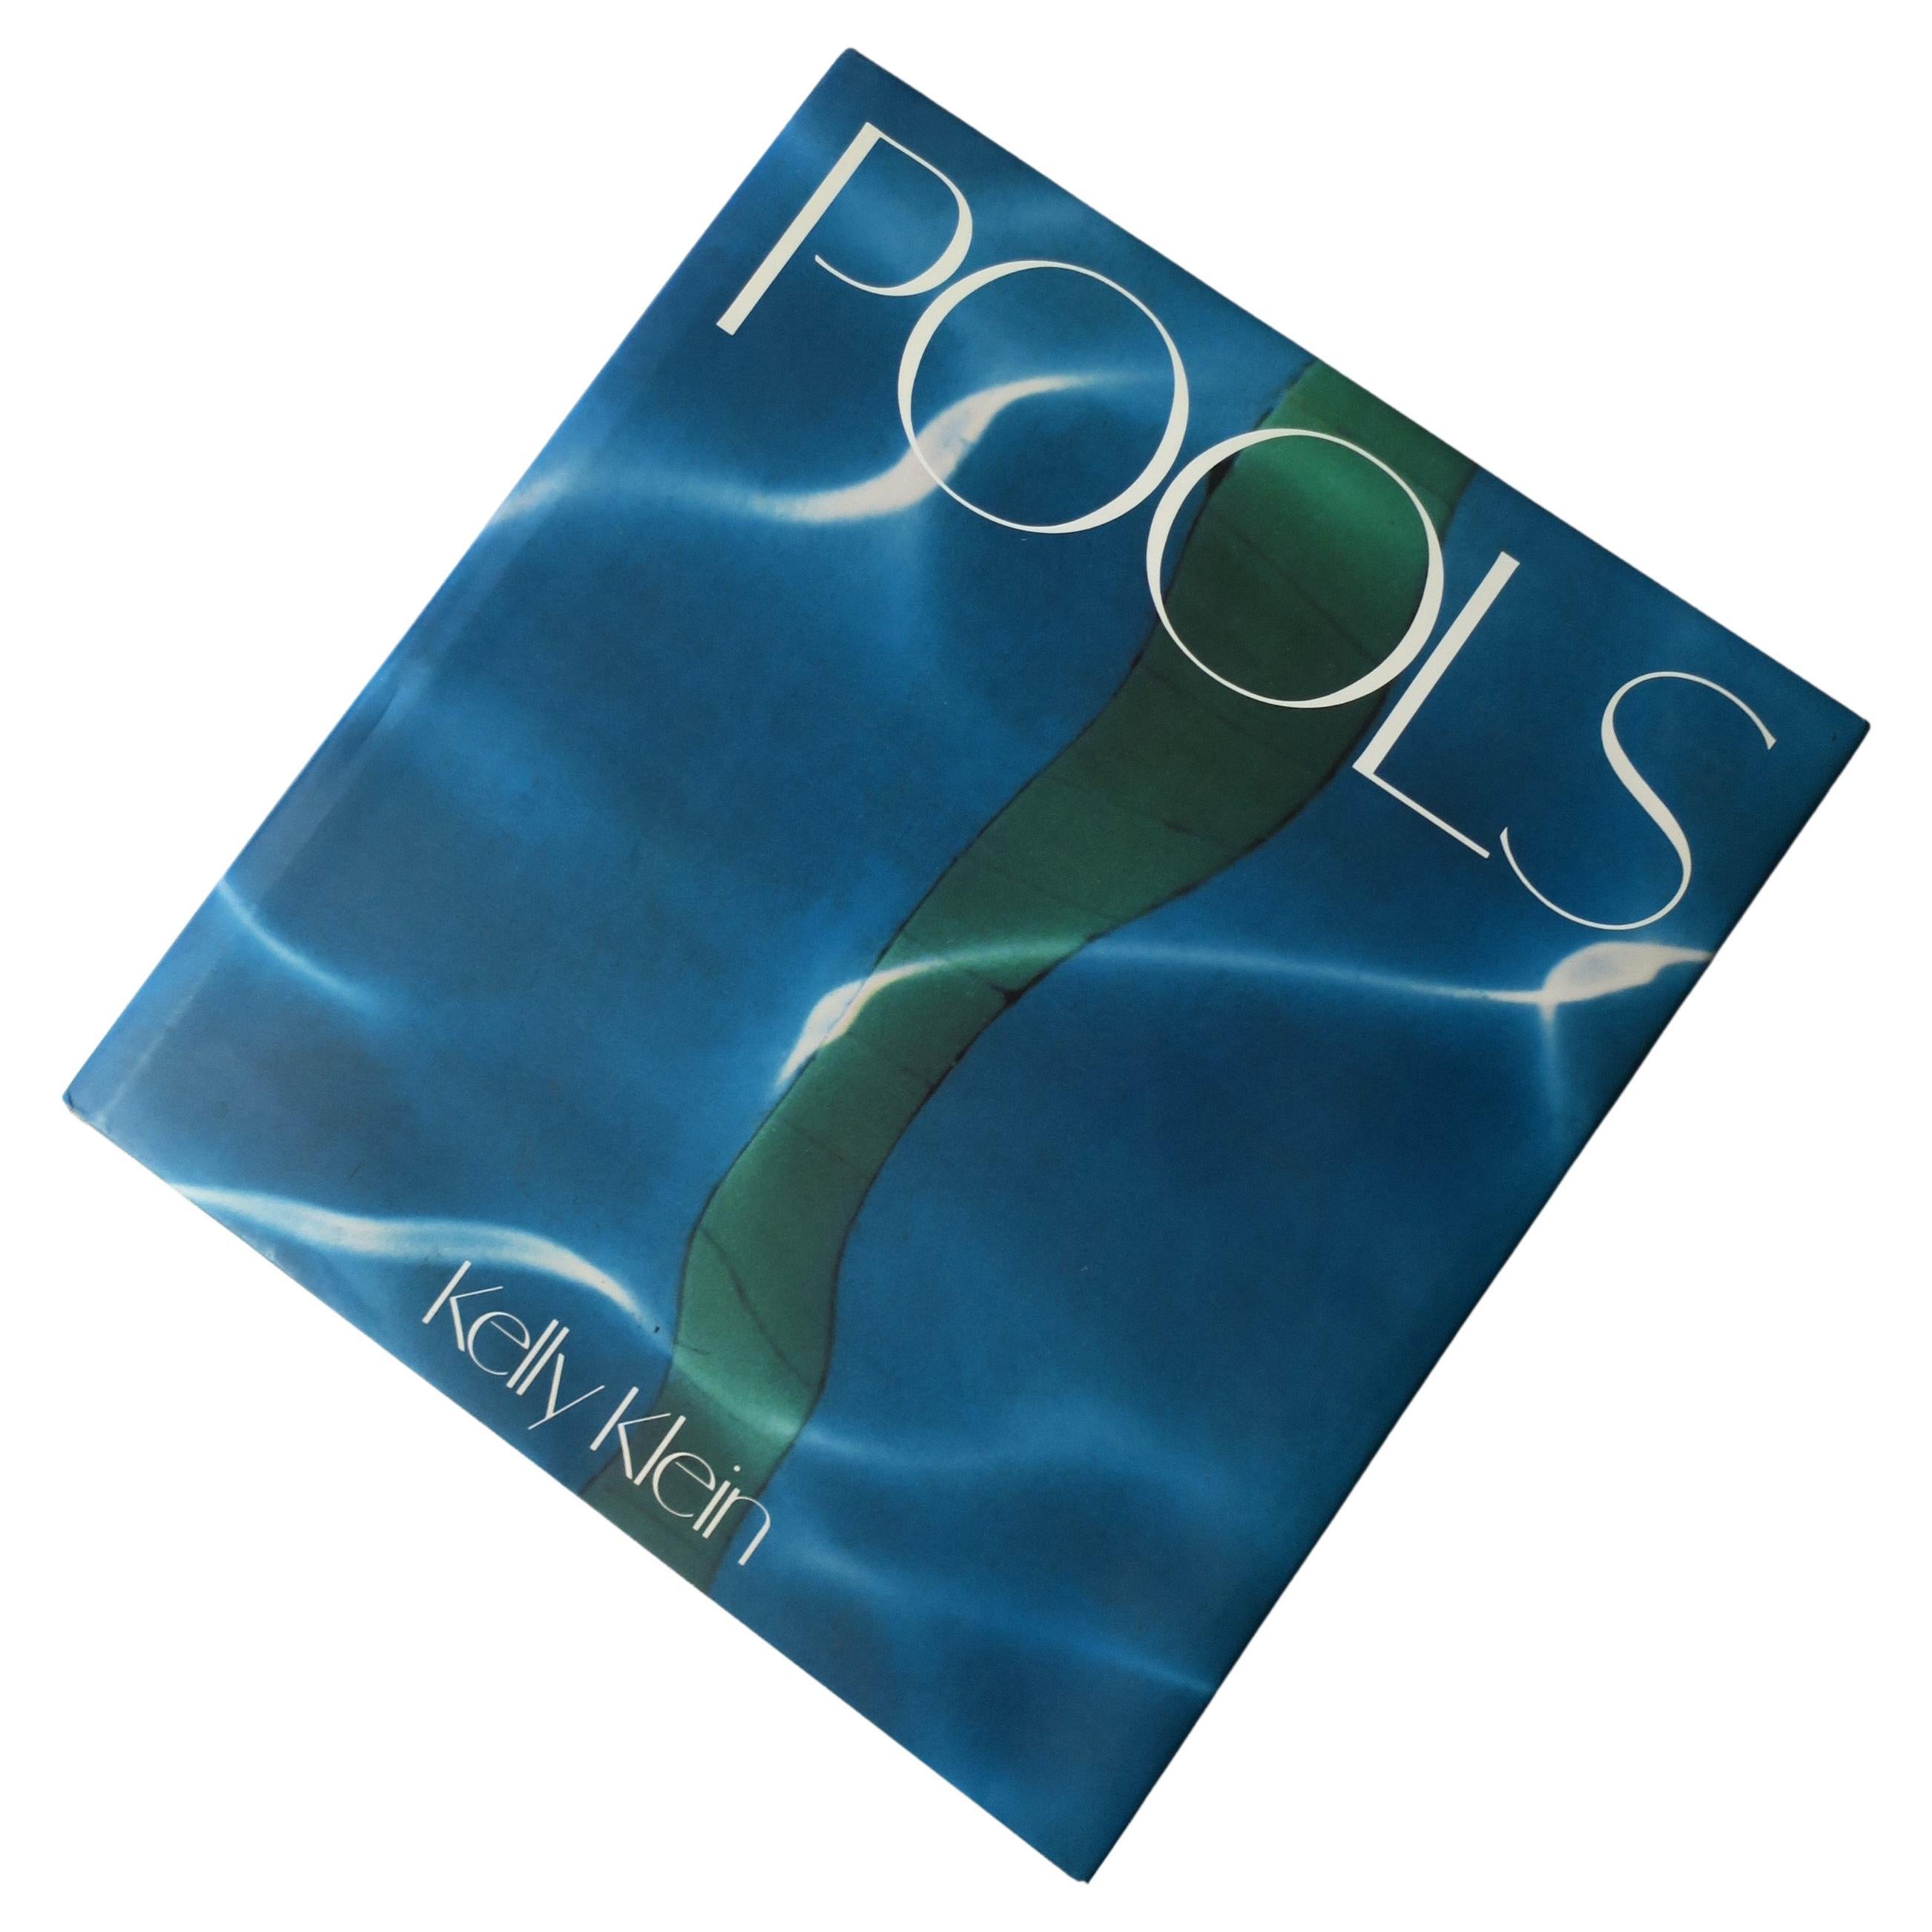 Pools by Kelly Klein an Architecture Coffee Table or Library Book, 1992